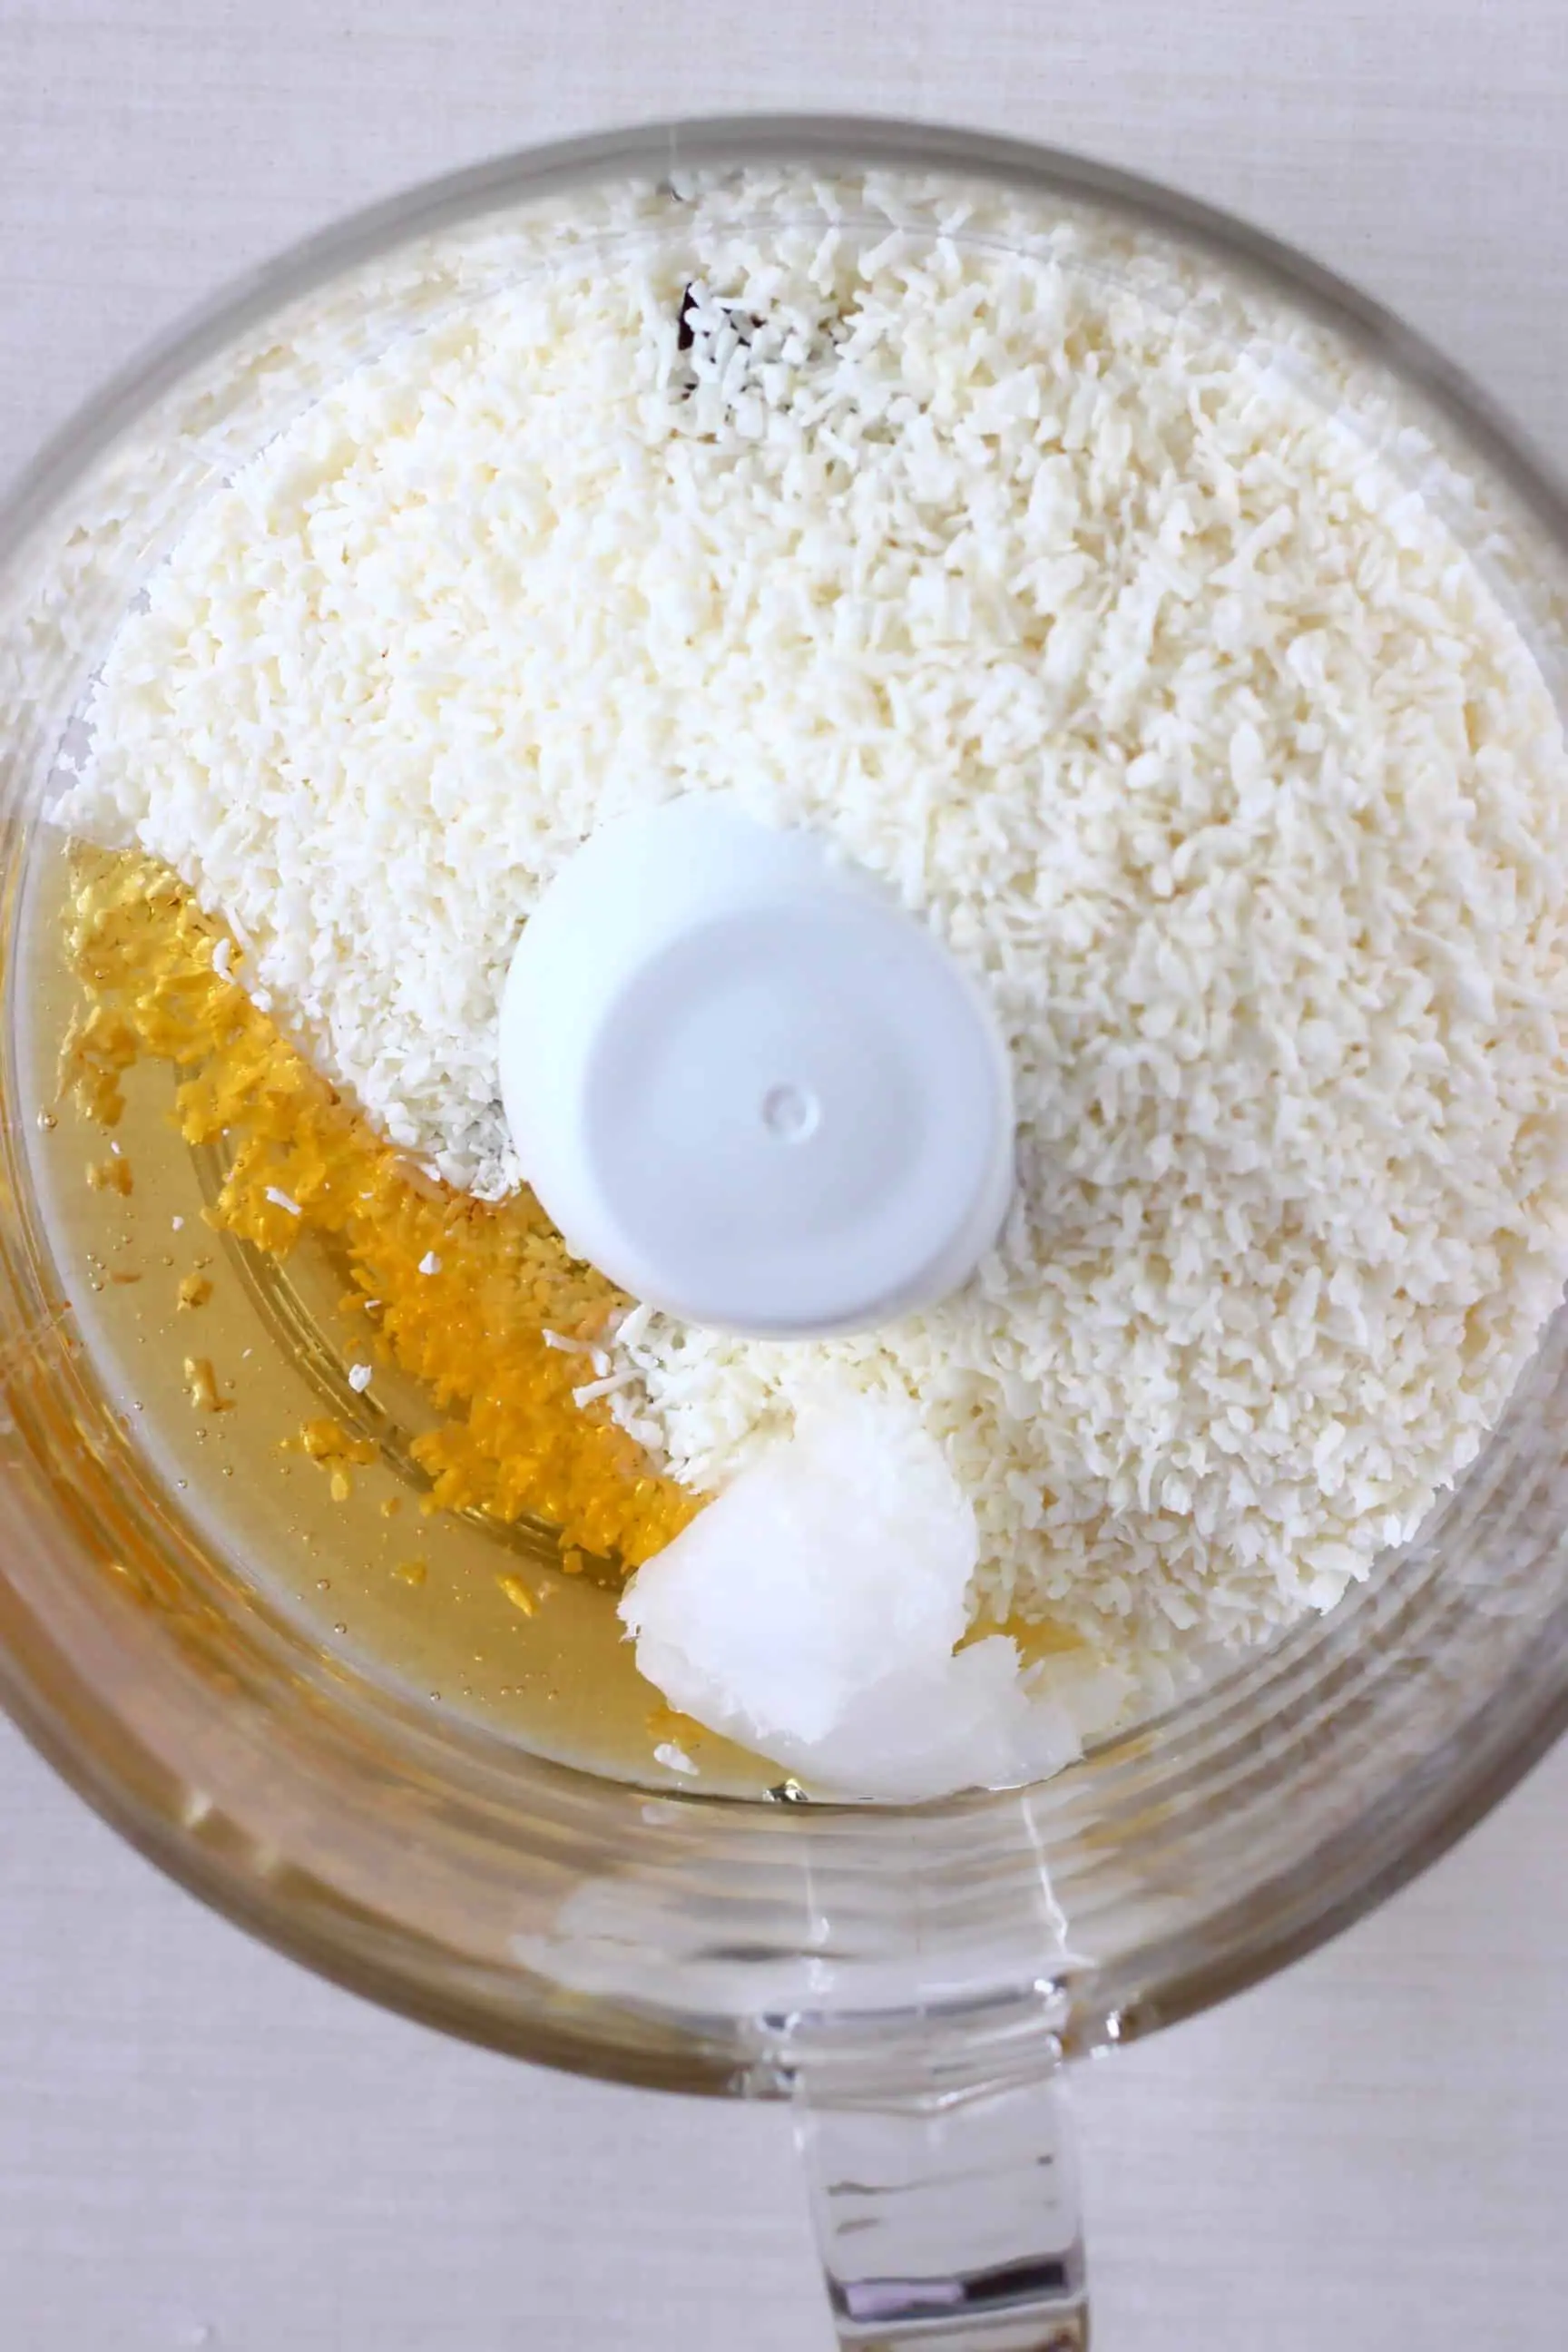 Desiccated coconut, coconut oil and agave syrup in a food processor